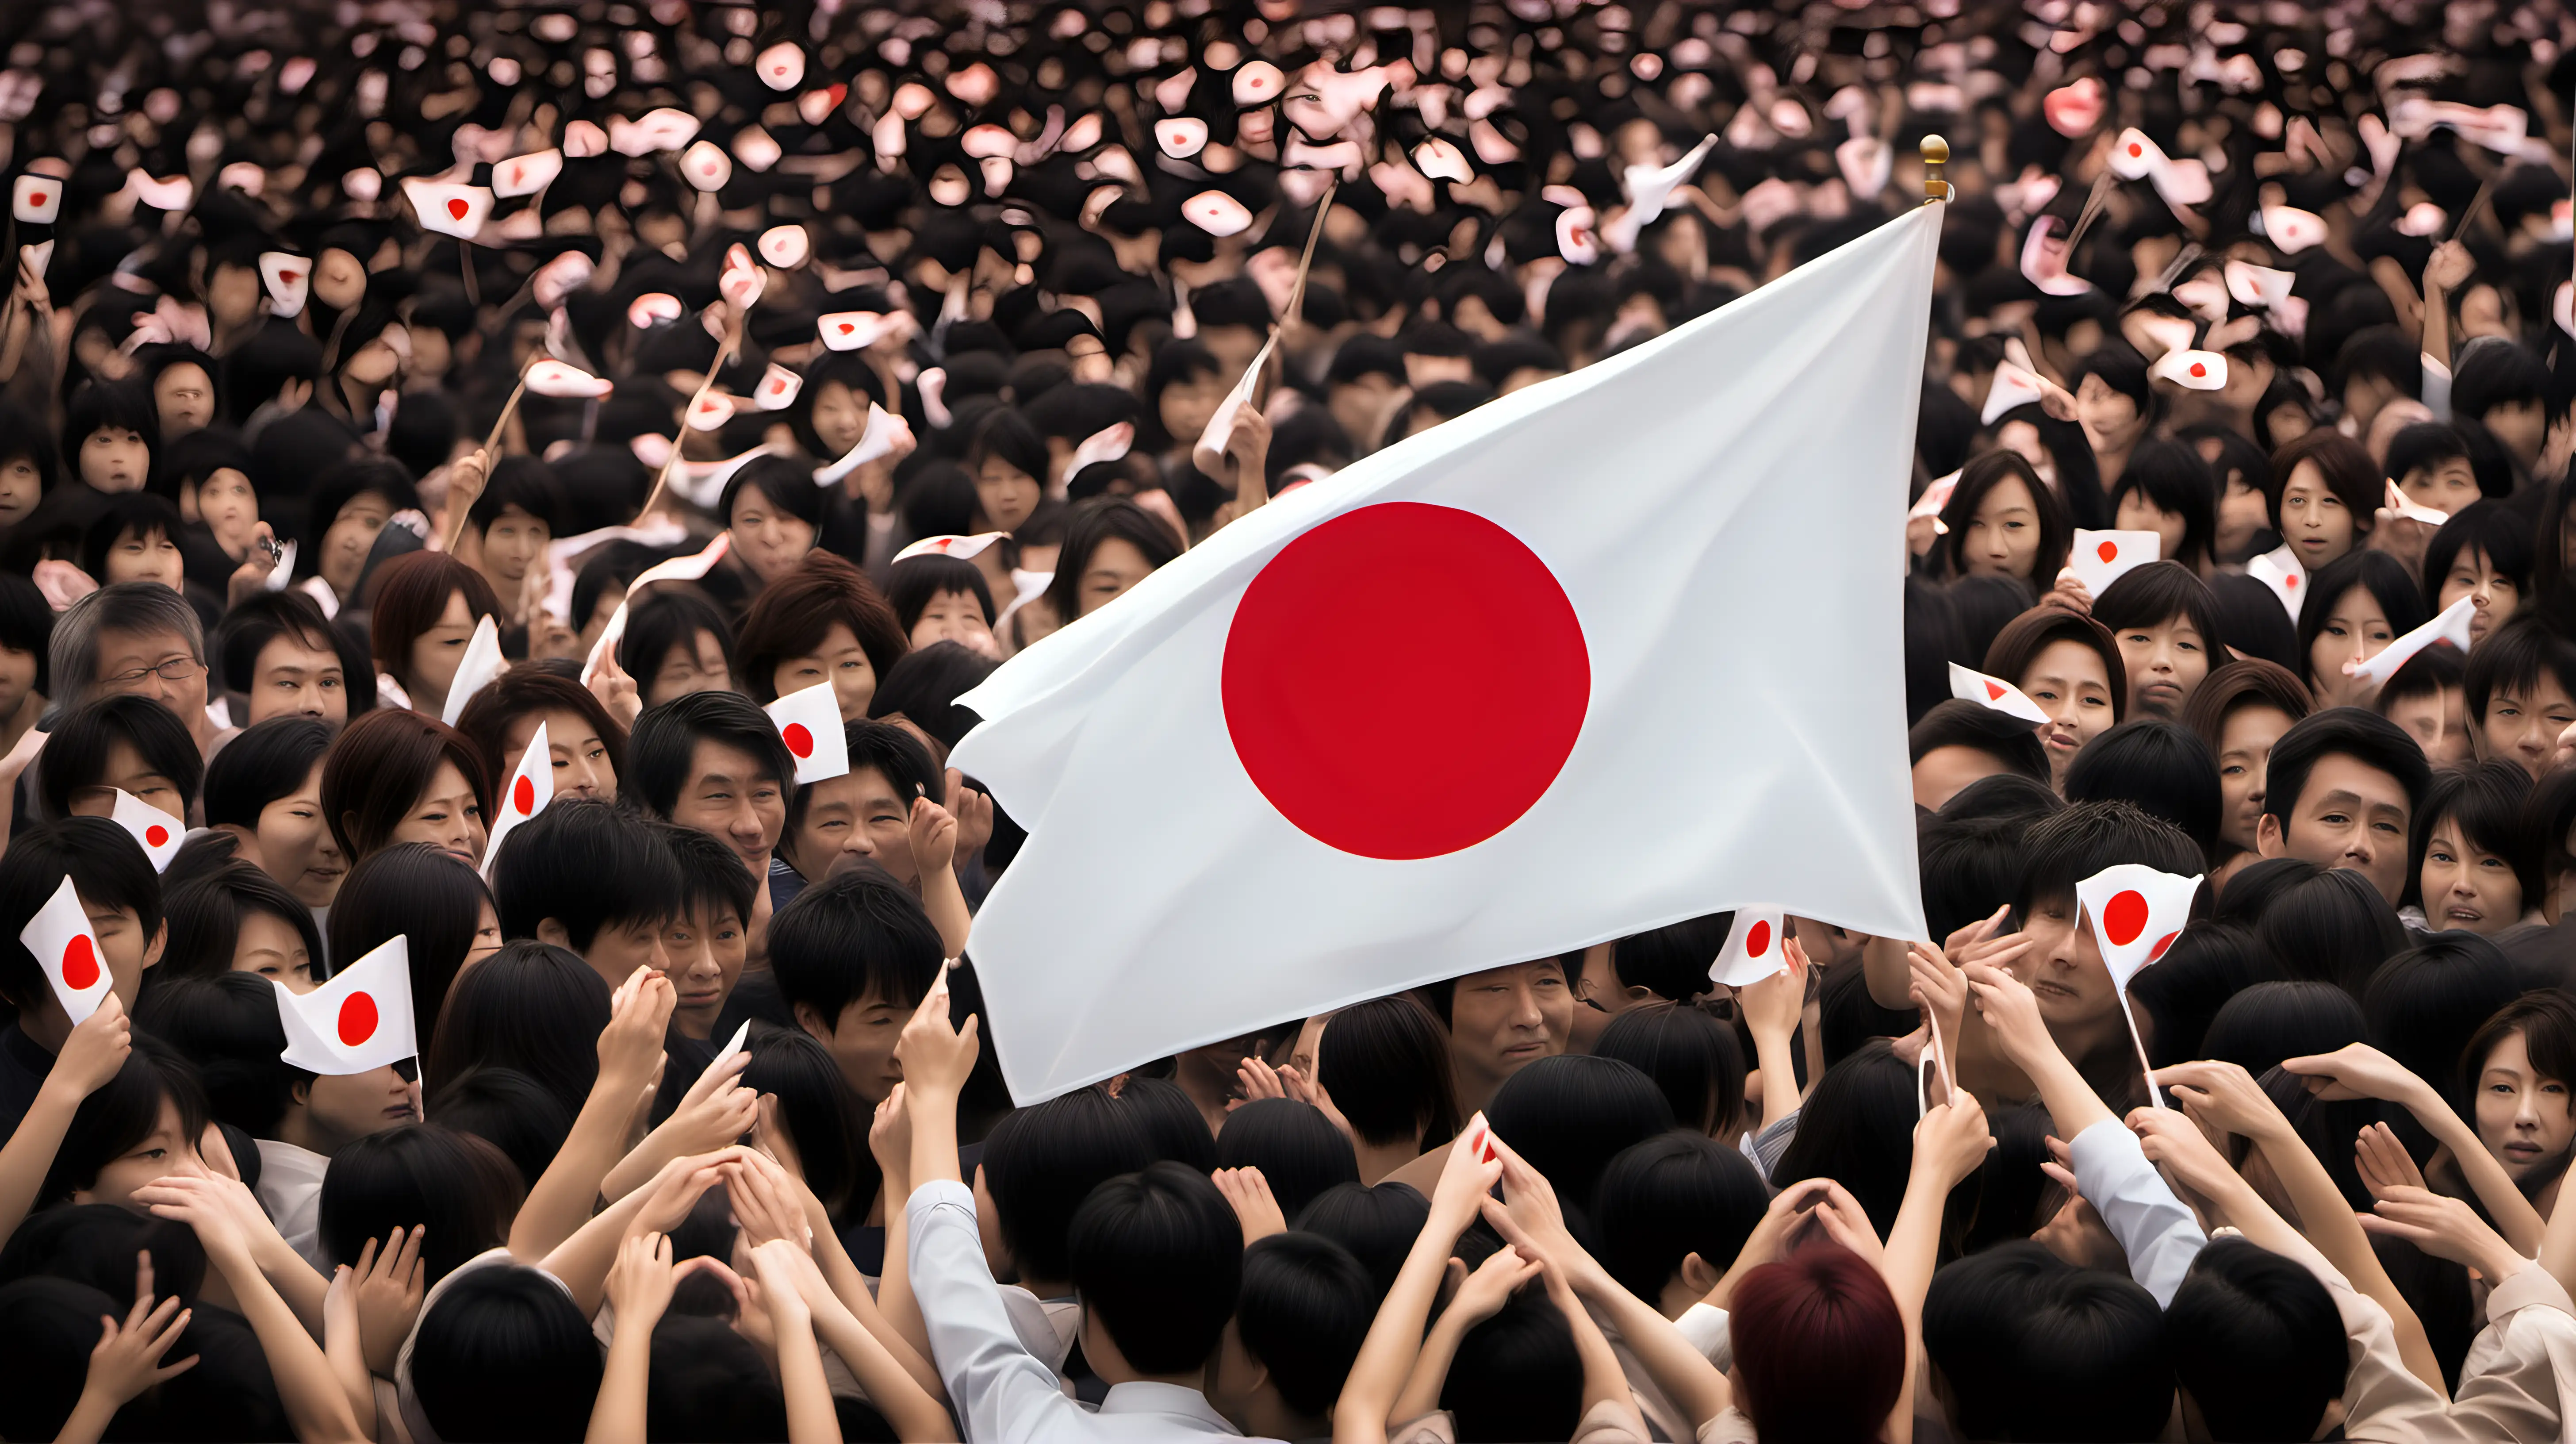 Showcase a person participating in a patriotic event, holding the Japanese flag aloft, surrounded by fellow citizens, expressing their shared love for the country.